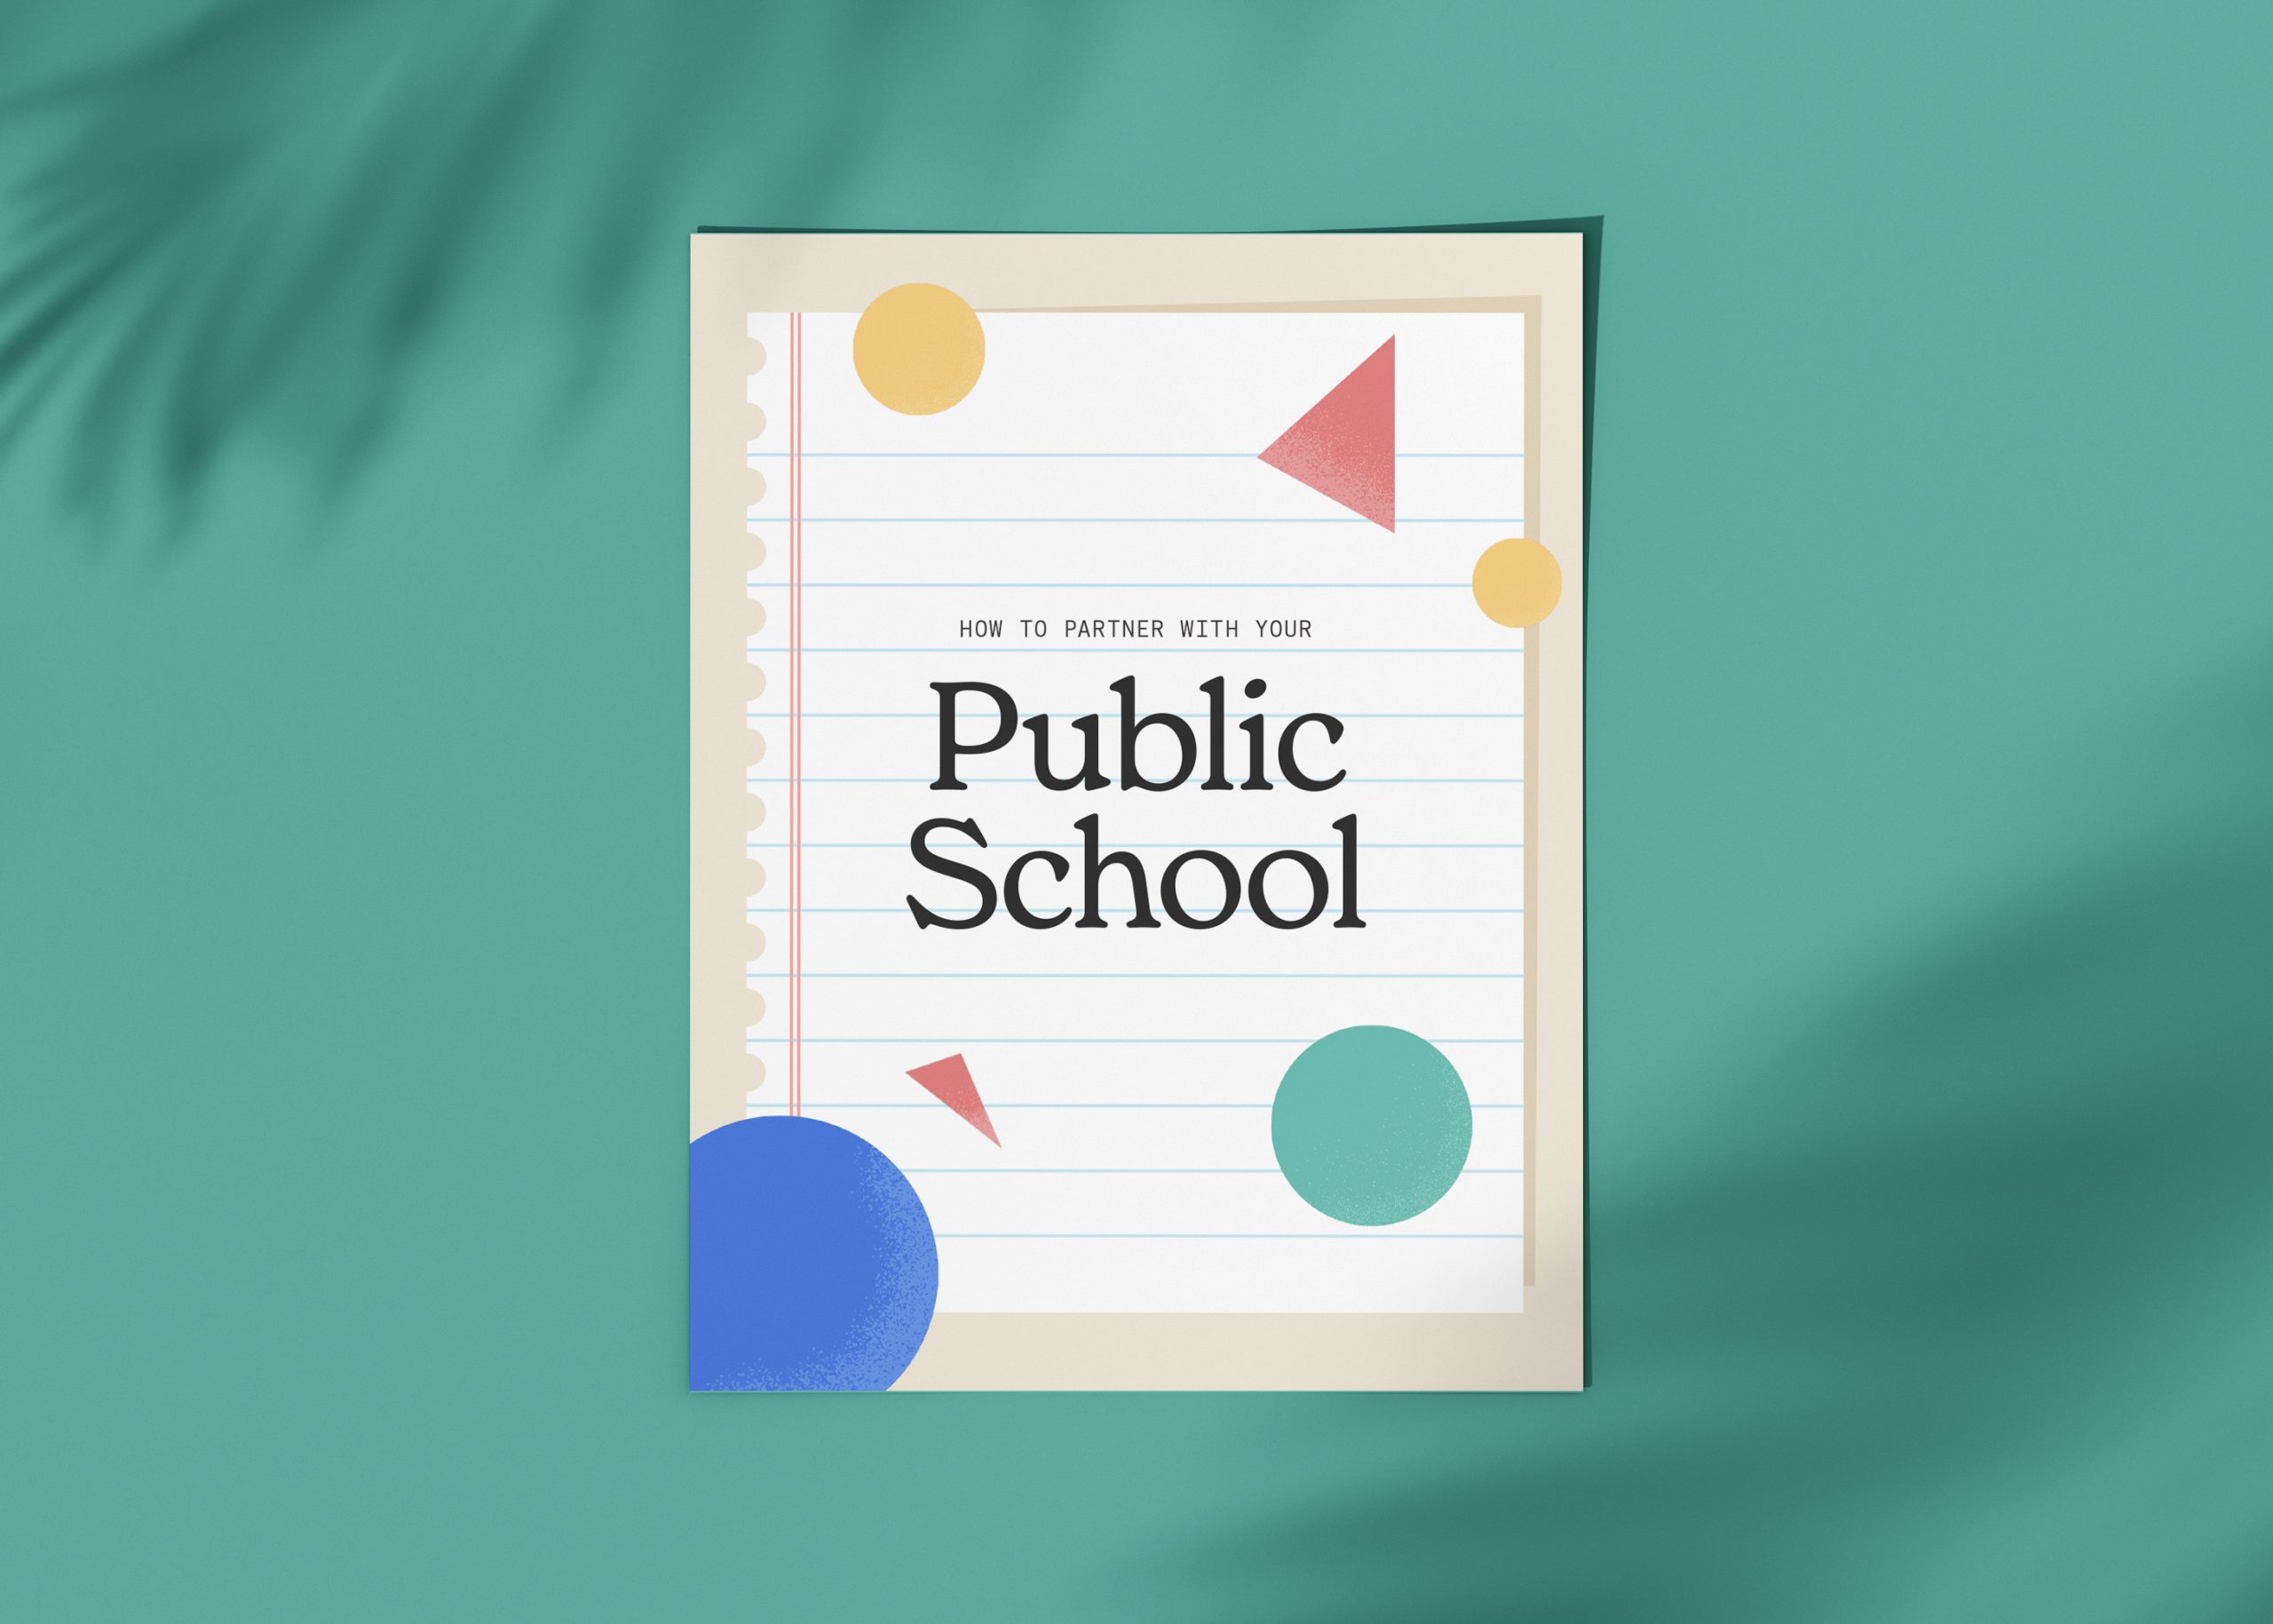 How To Partner With Your Public School